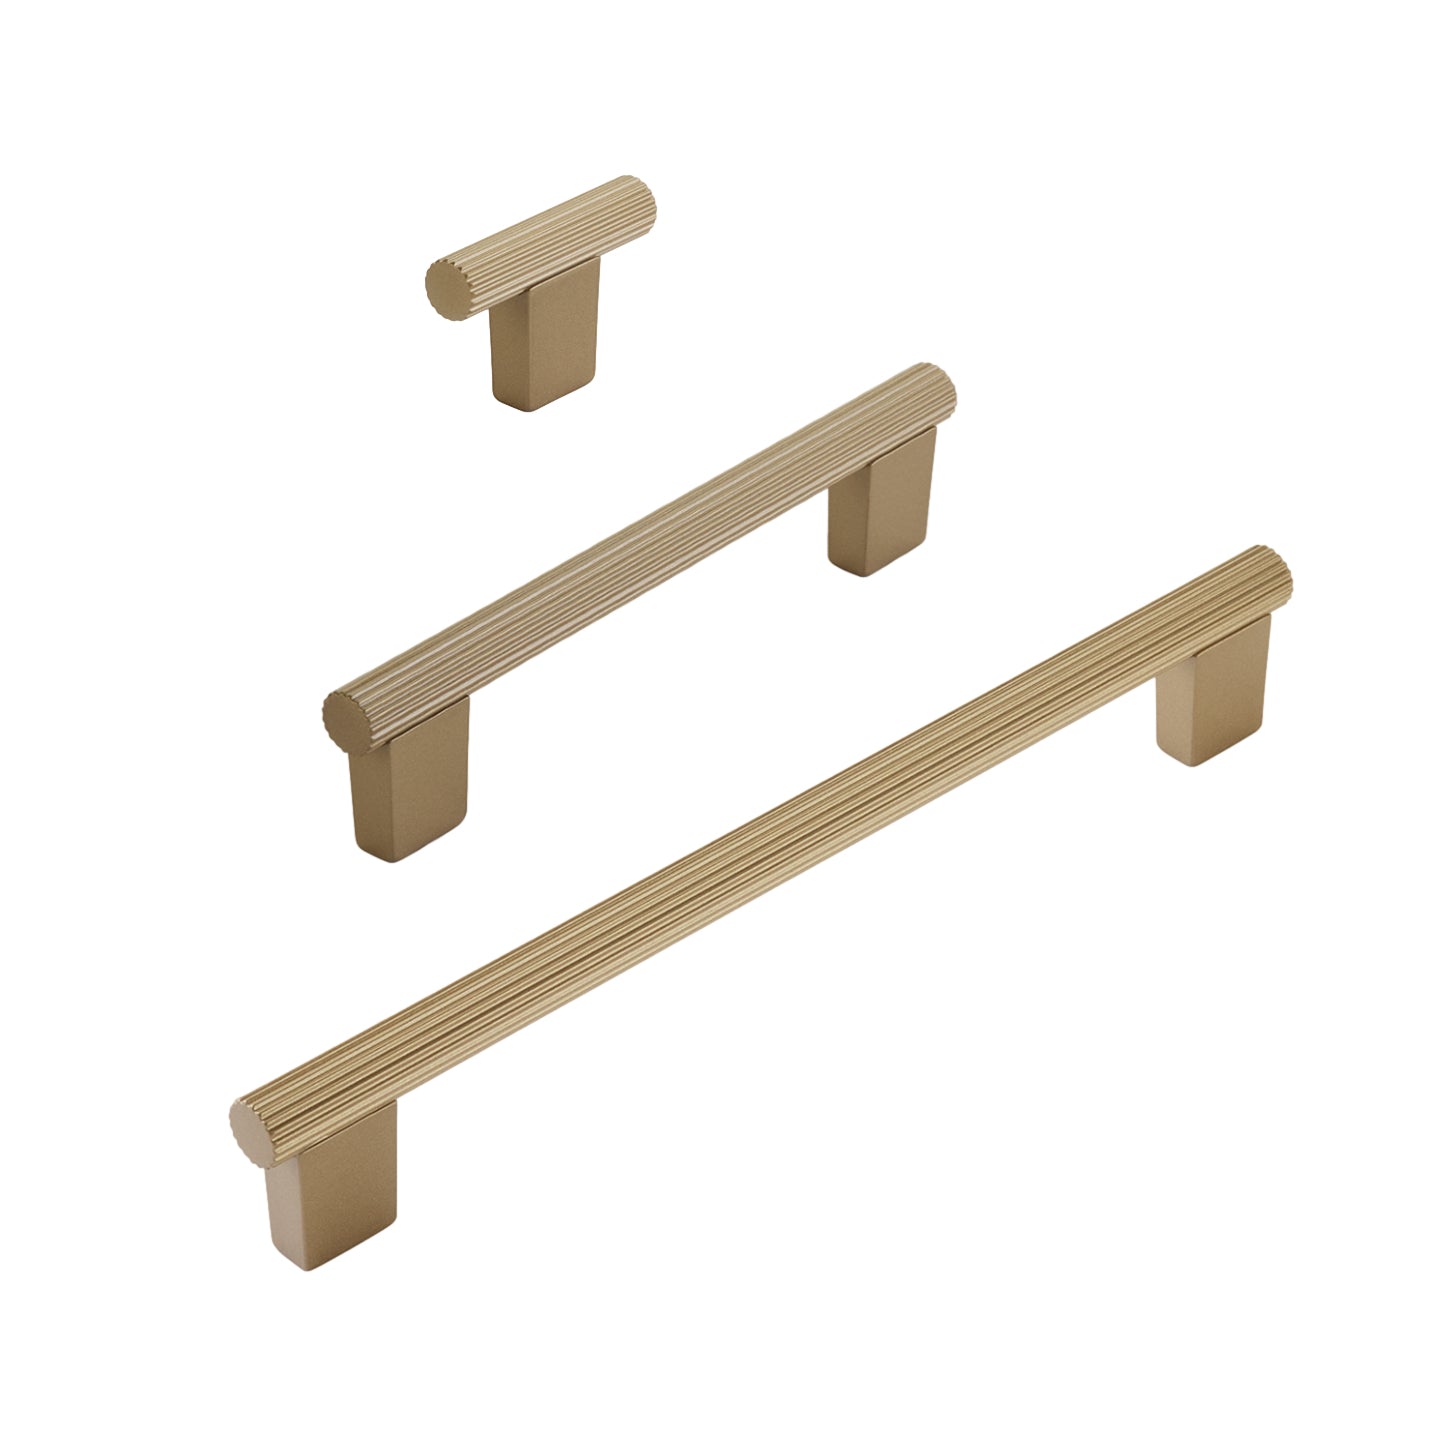 Warm Gold "Knox" Cabinet Knobs and Drawer Pulls